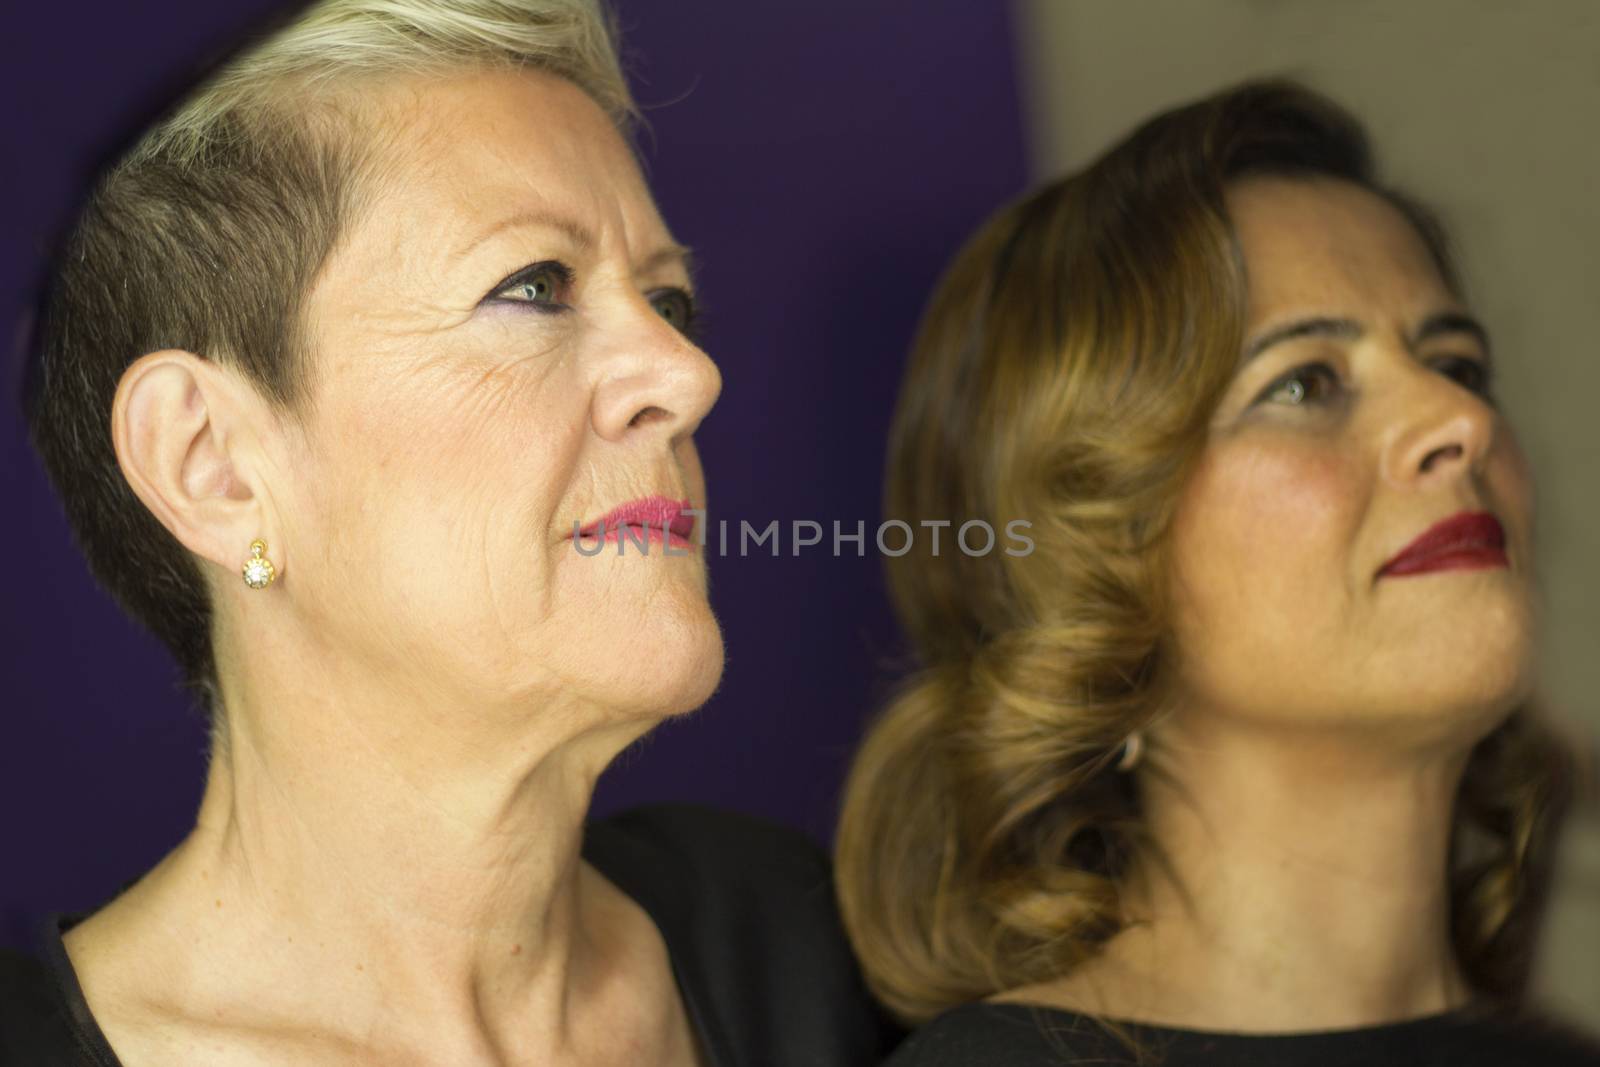 Woman with platinum blonde short hair and woman with wavy brown long hair